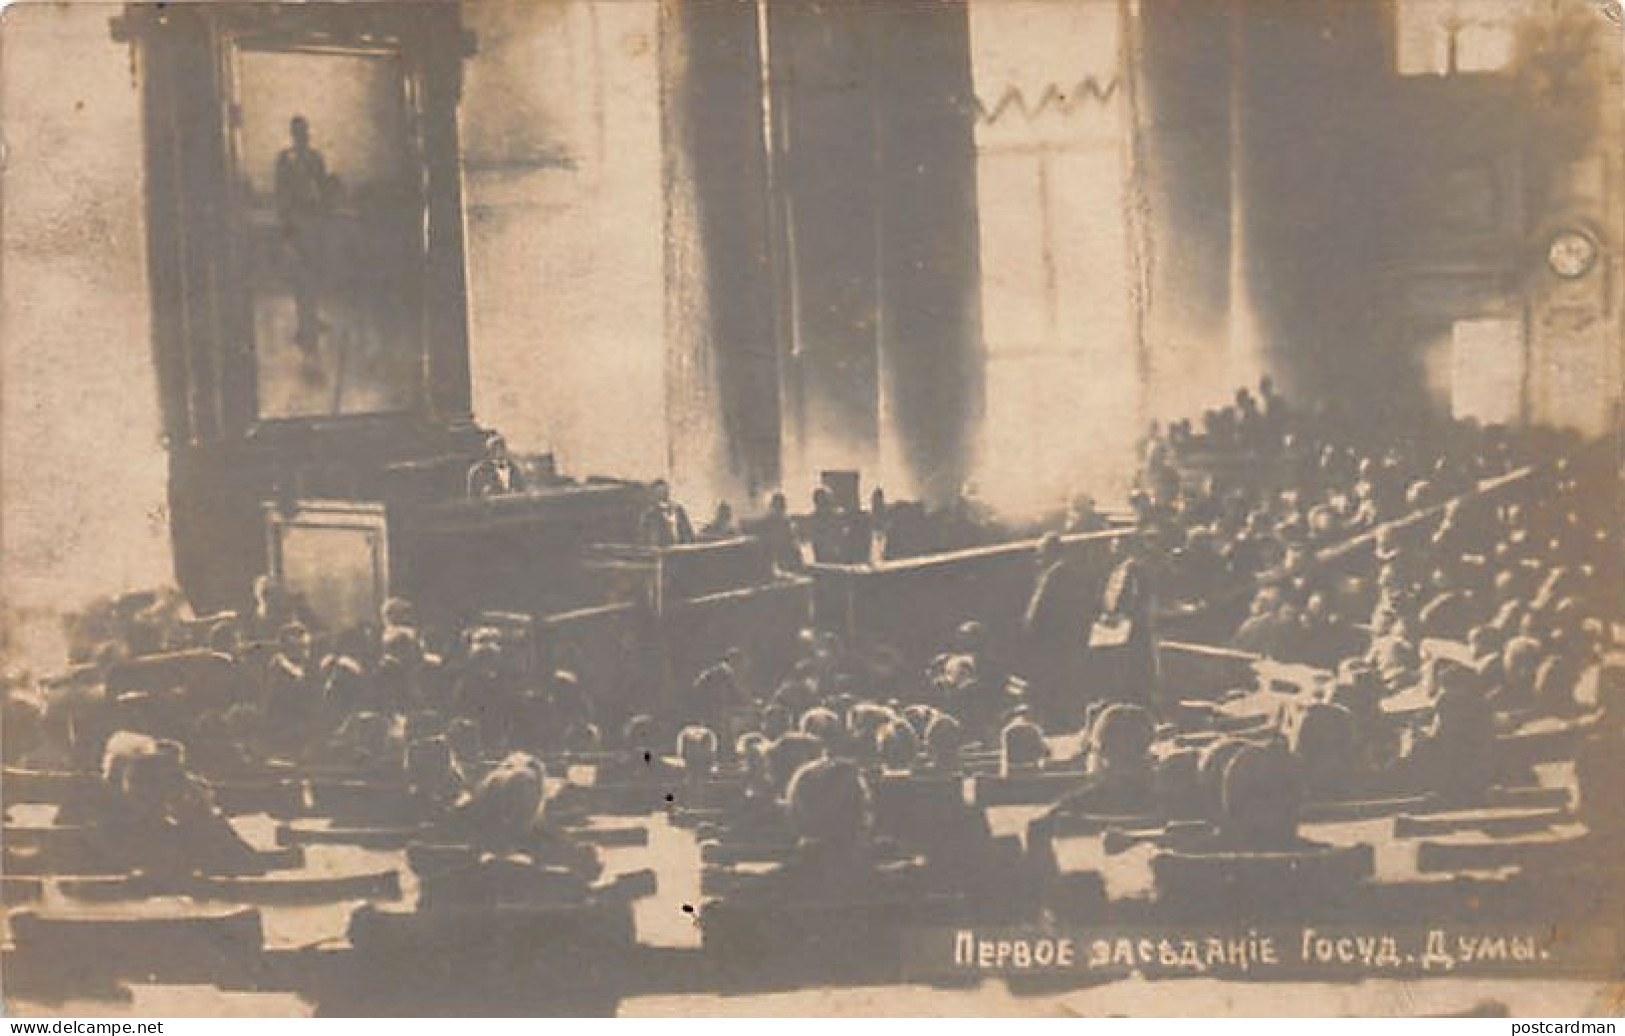 Russia - SAINT-PETERSBURG - The First Meeting Of The State Duma On 27 April 1906 - REAL PHOTO - Publ. Unknown  - Russland